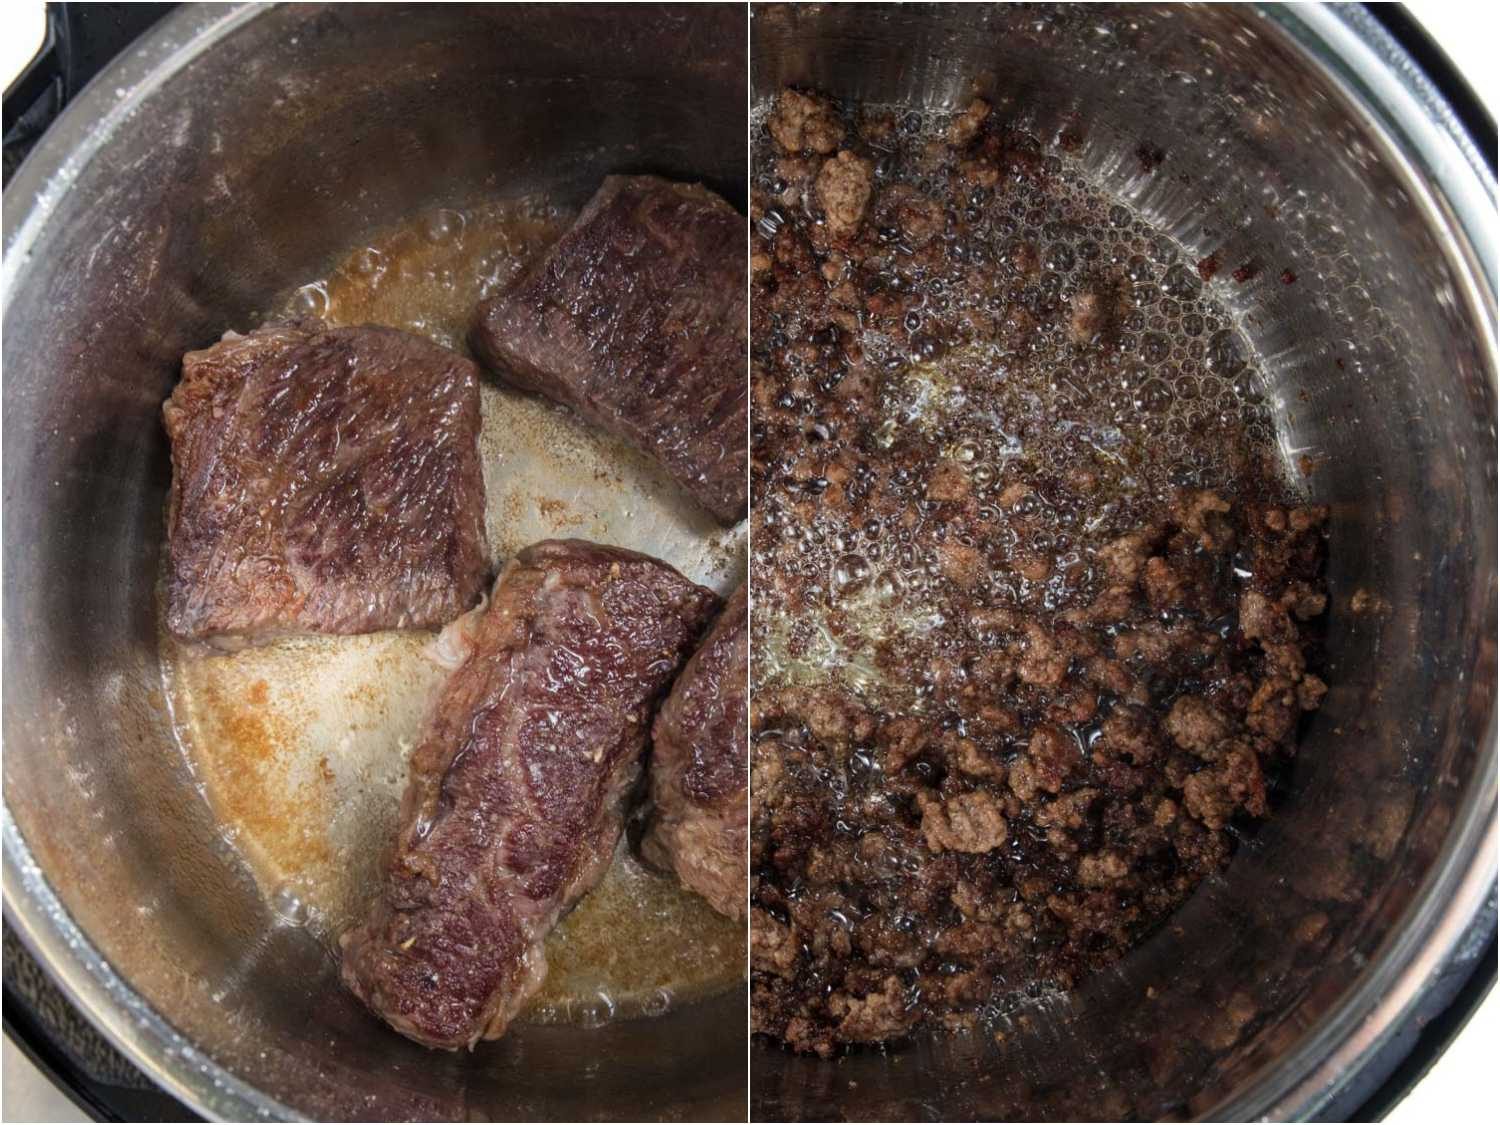 Two pictures of beef searing in a pressure cooker (ground and large slabs)